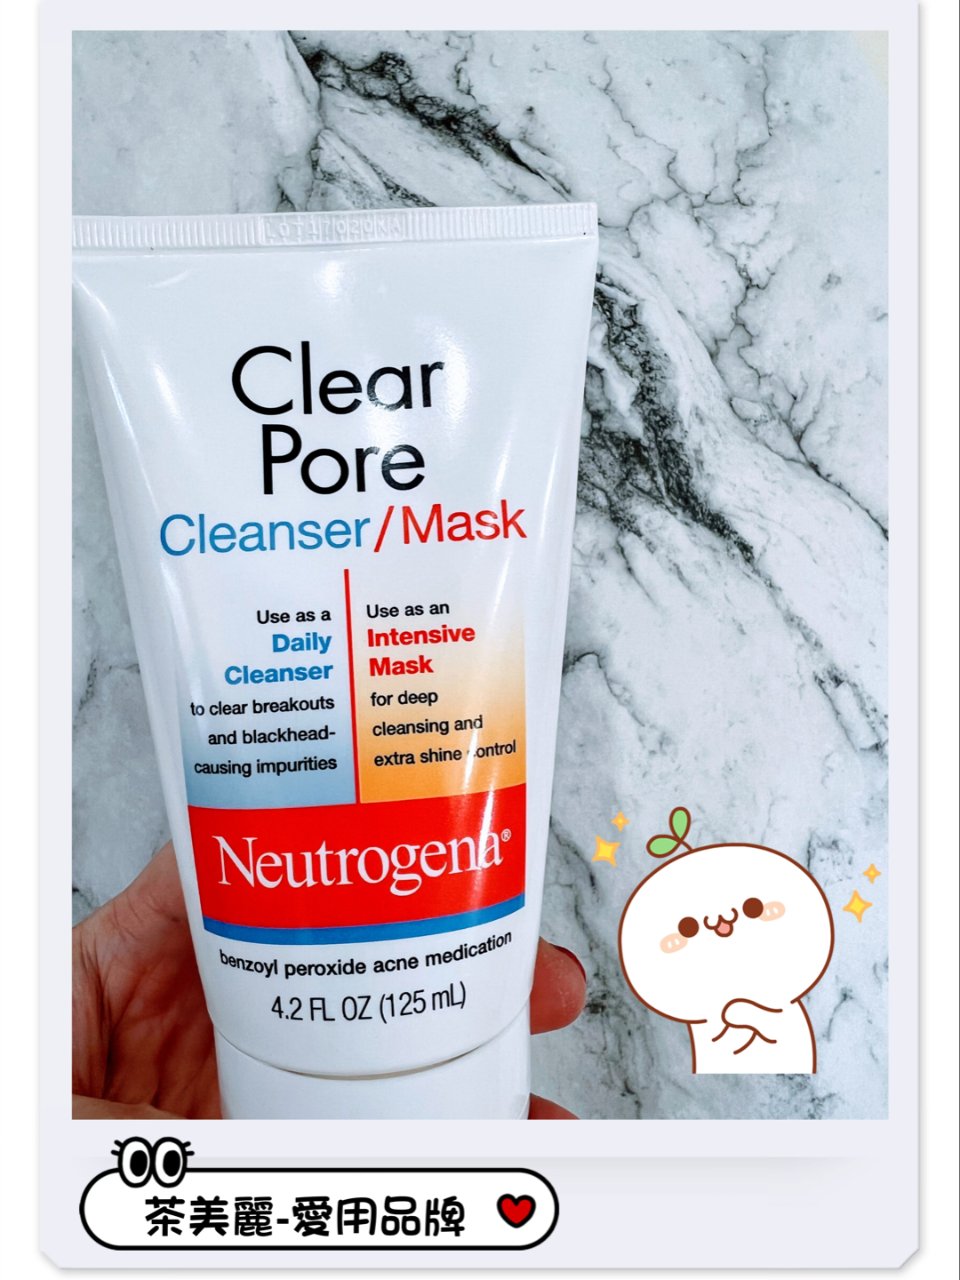 Neutrogena Clear Pore Cleanser/Mask, 4.2 Ounce : Facial Masks : Beauty & Personal Care